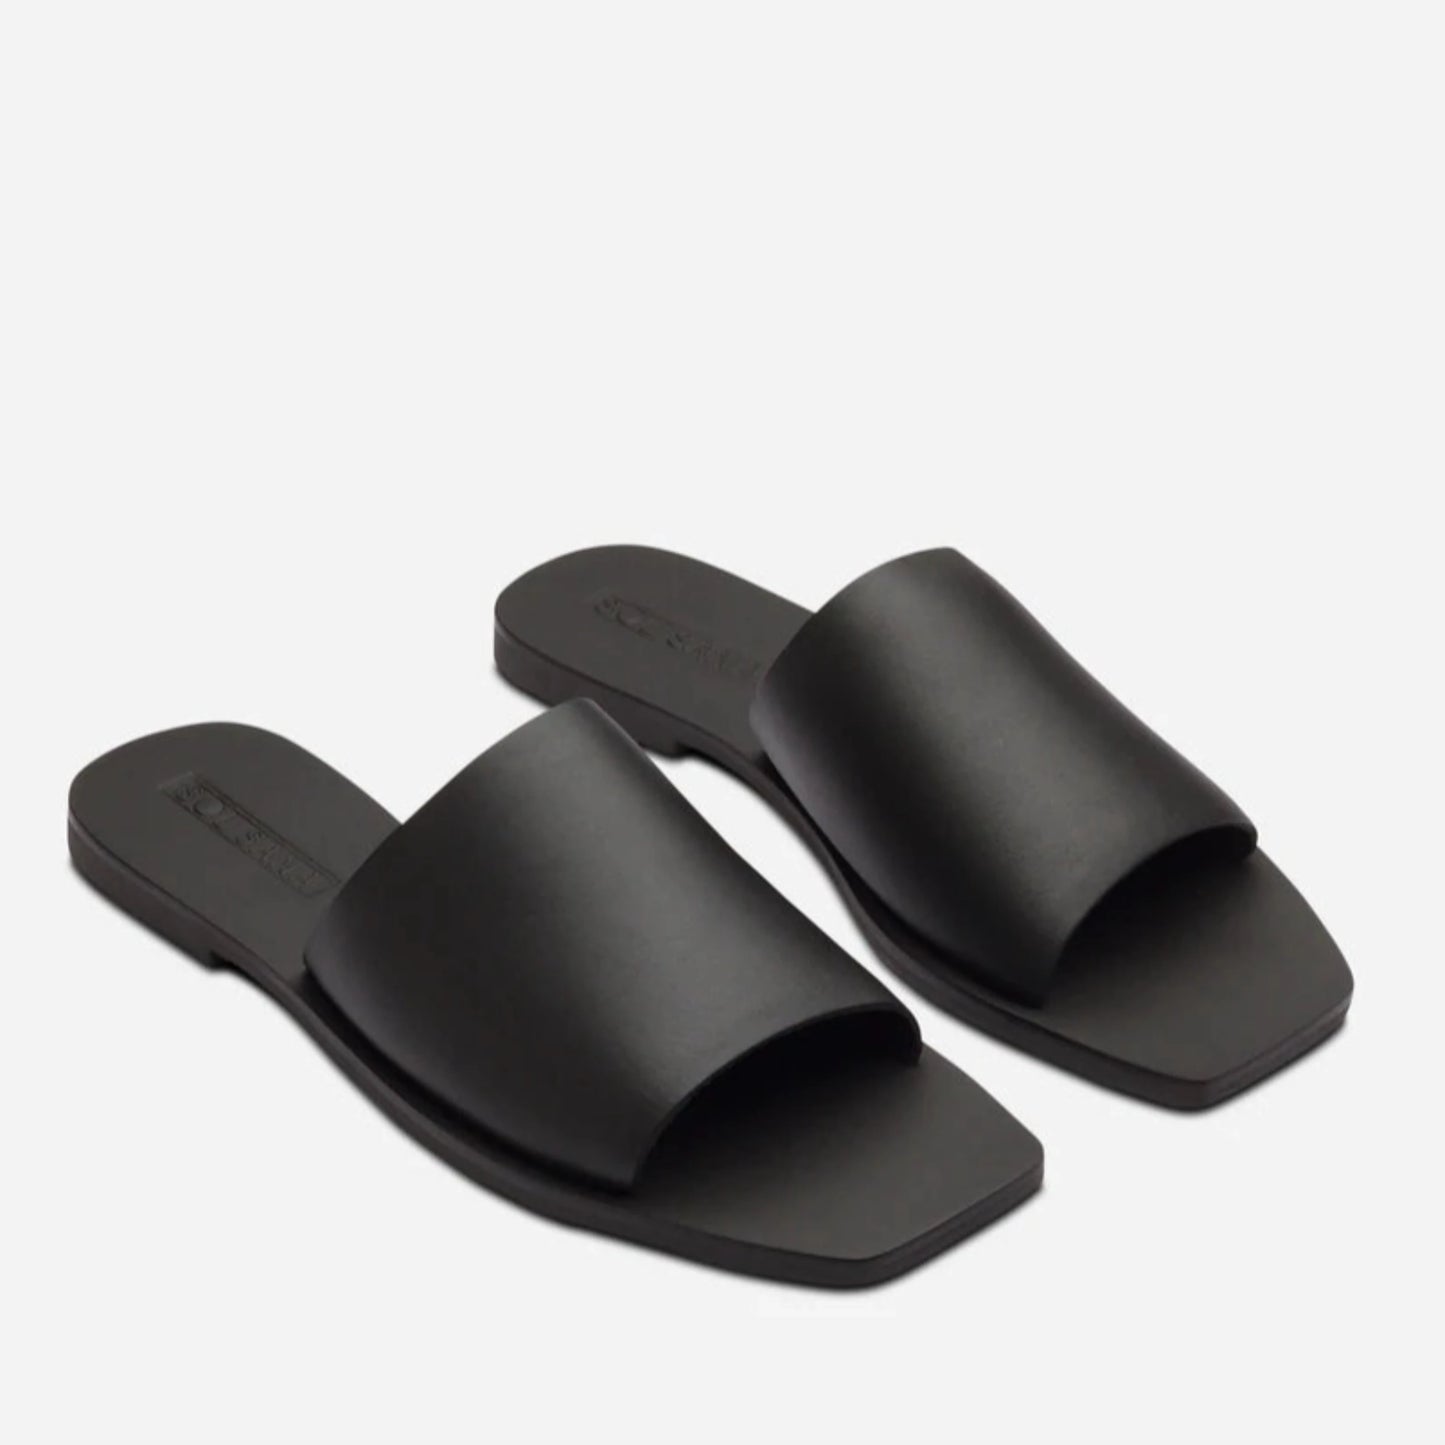 The everyday open-toe Mila slide gets a contemporary update with a new square sole. High quality matte leather provides a comfortable top strap and provides a high end finish to this minimalist shoe